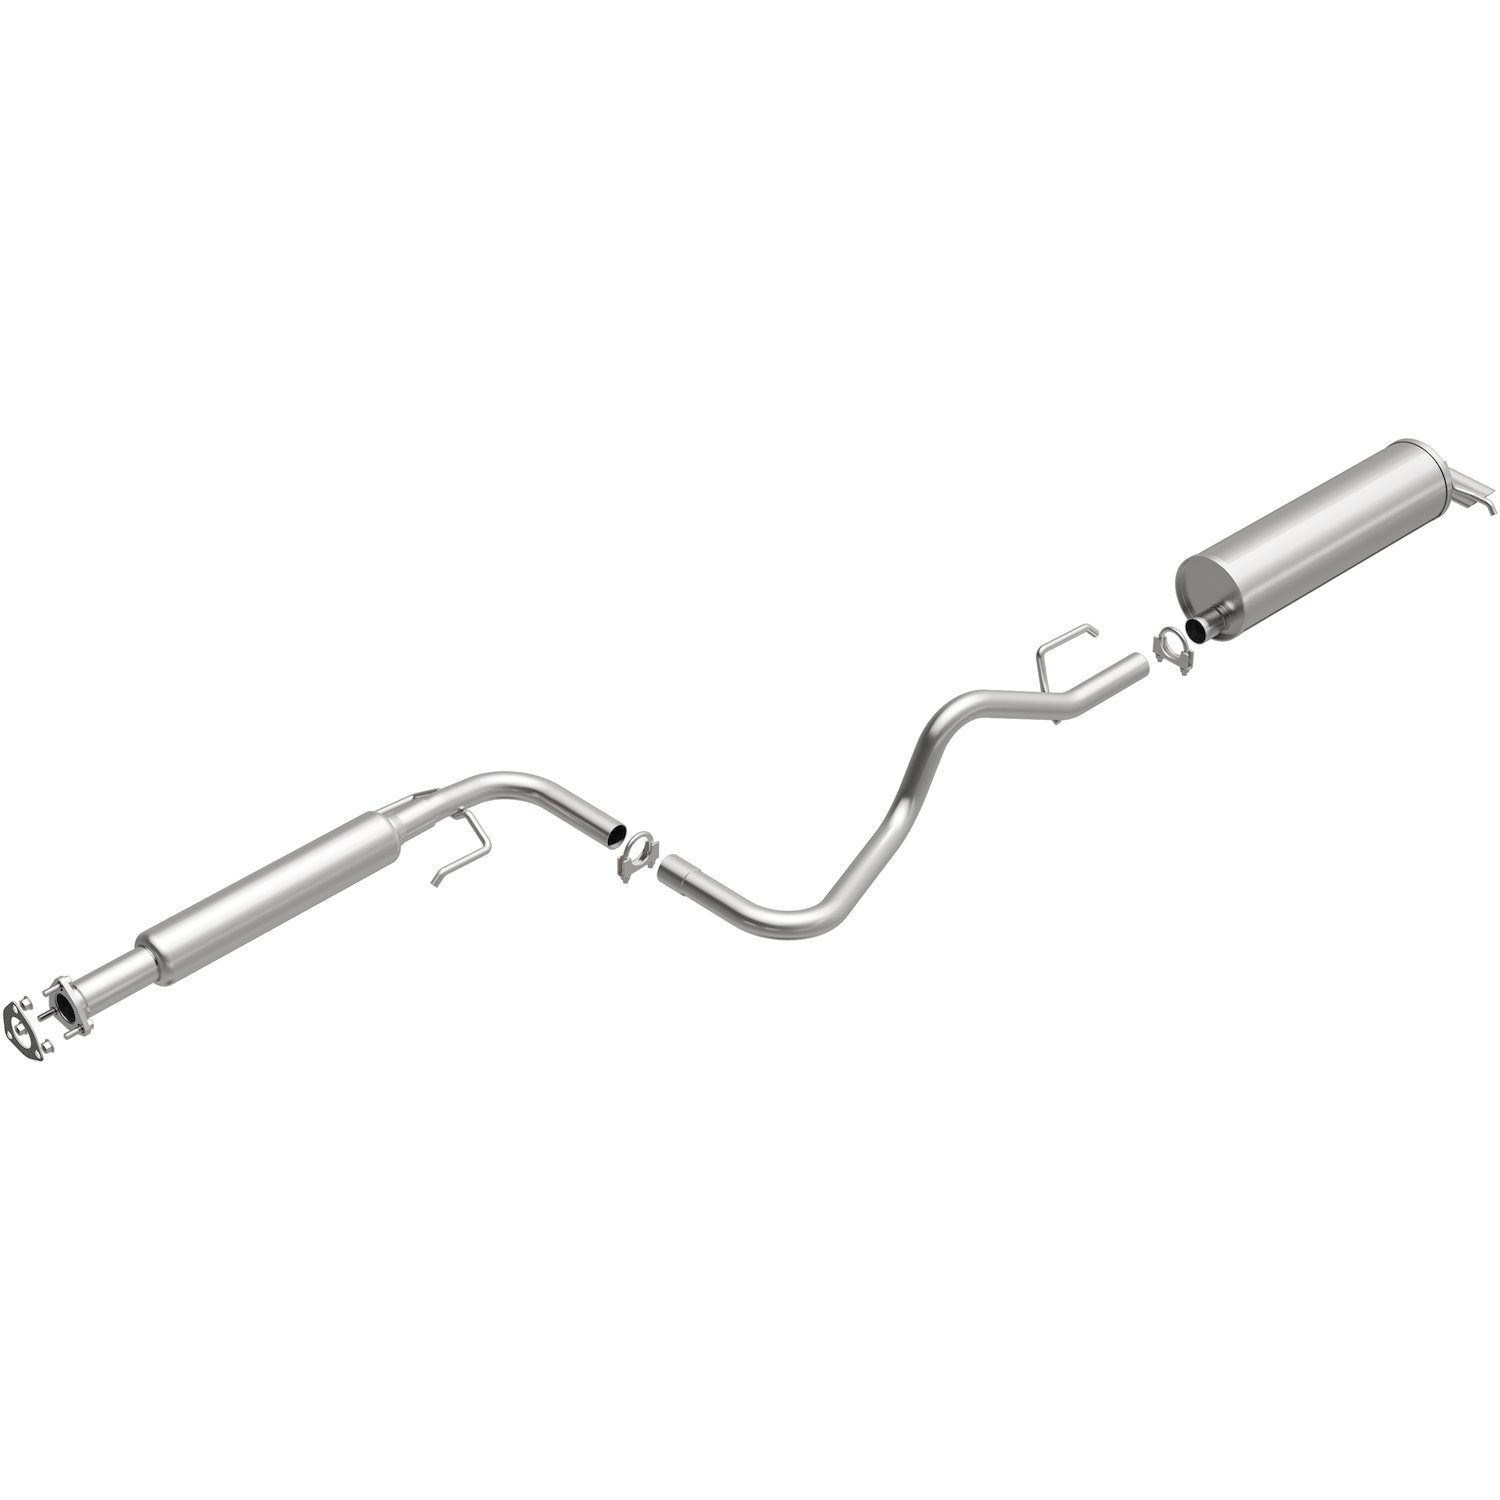 Direct-Fit Exhaust Kit, 2003-2004 Saturn Ion 2.2L